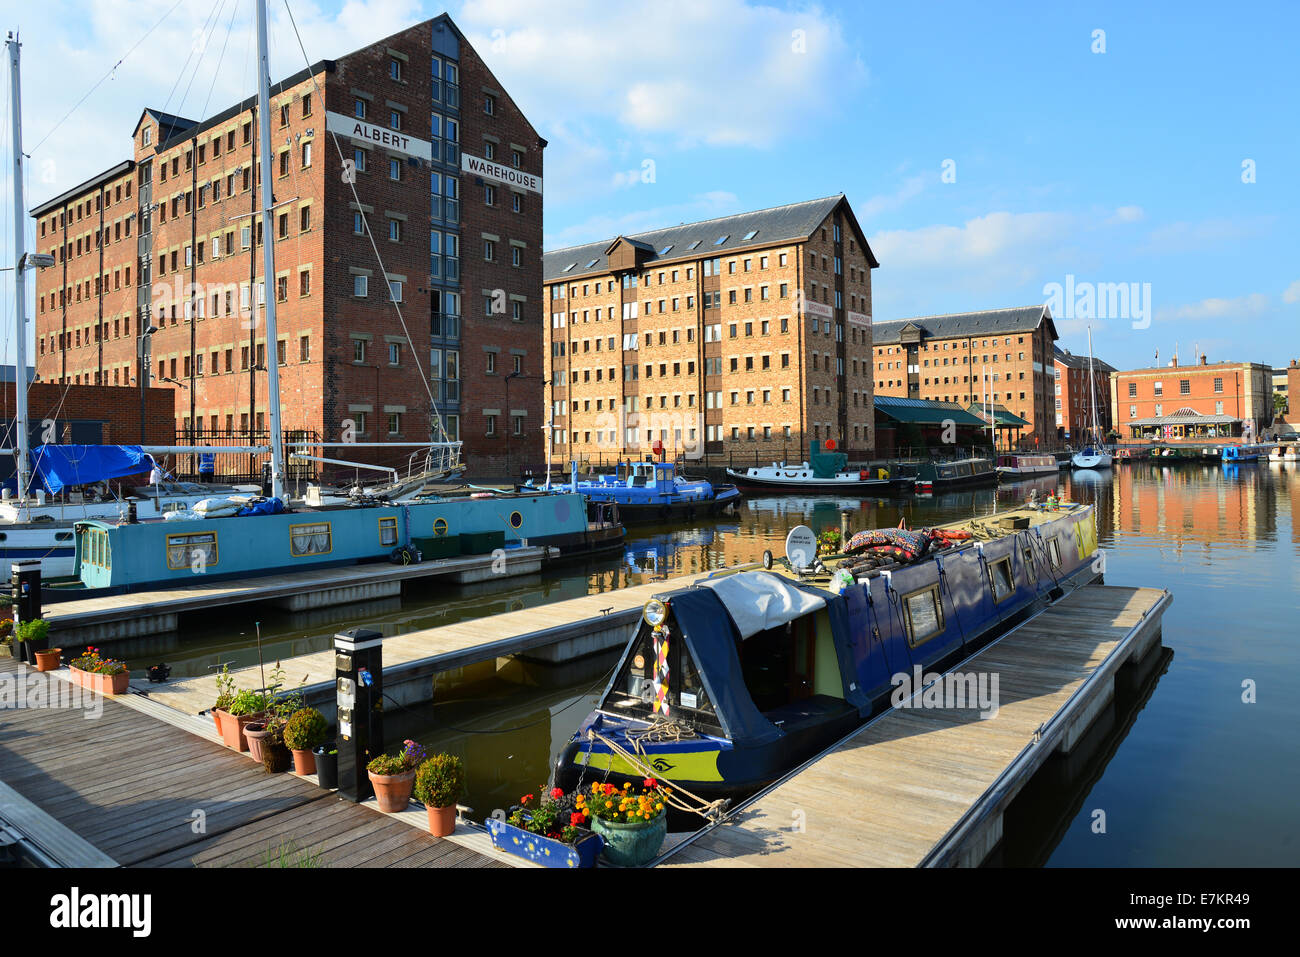 Canal boats moored in Gloucester Docks, Gloucester, Gloucestershire, England, United Kingdom Stock Photo